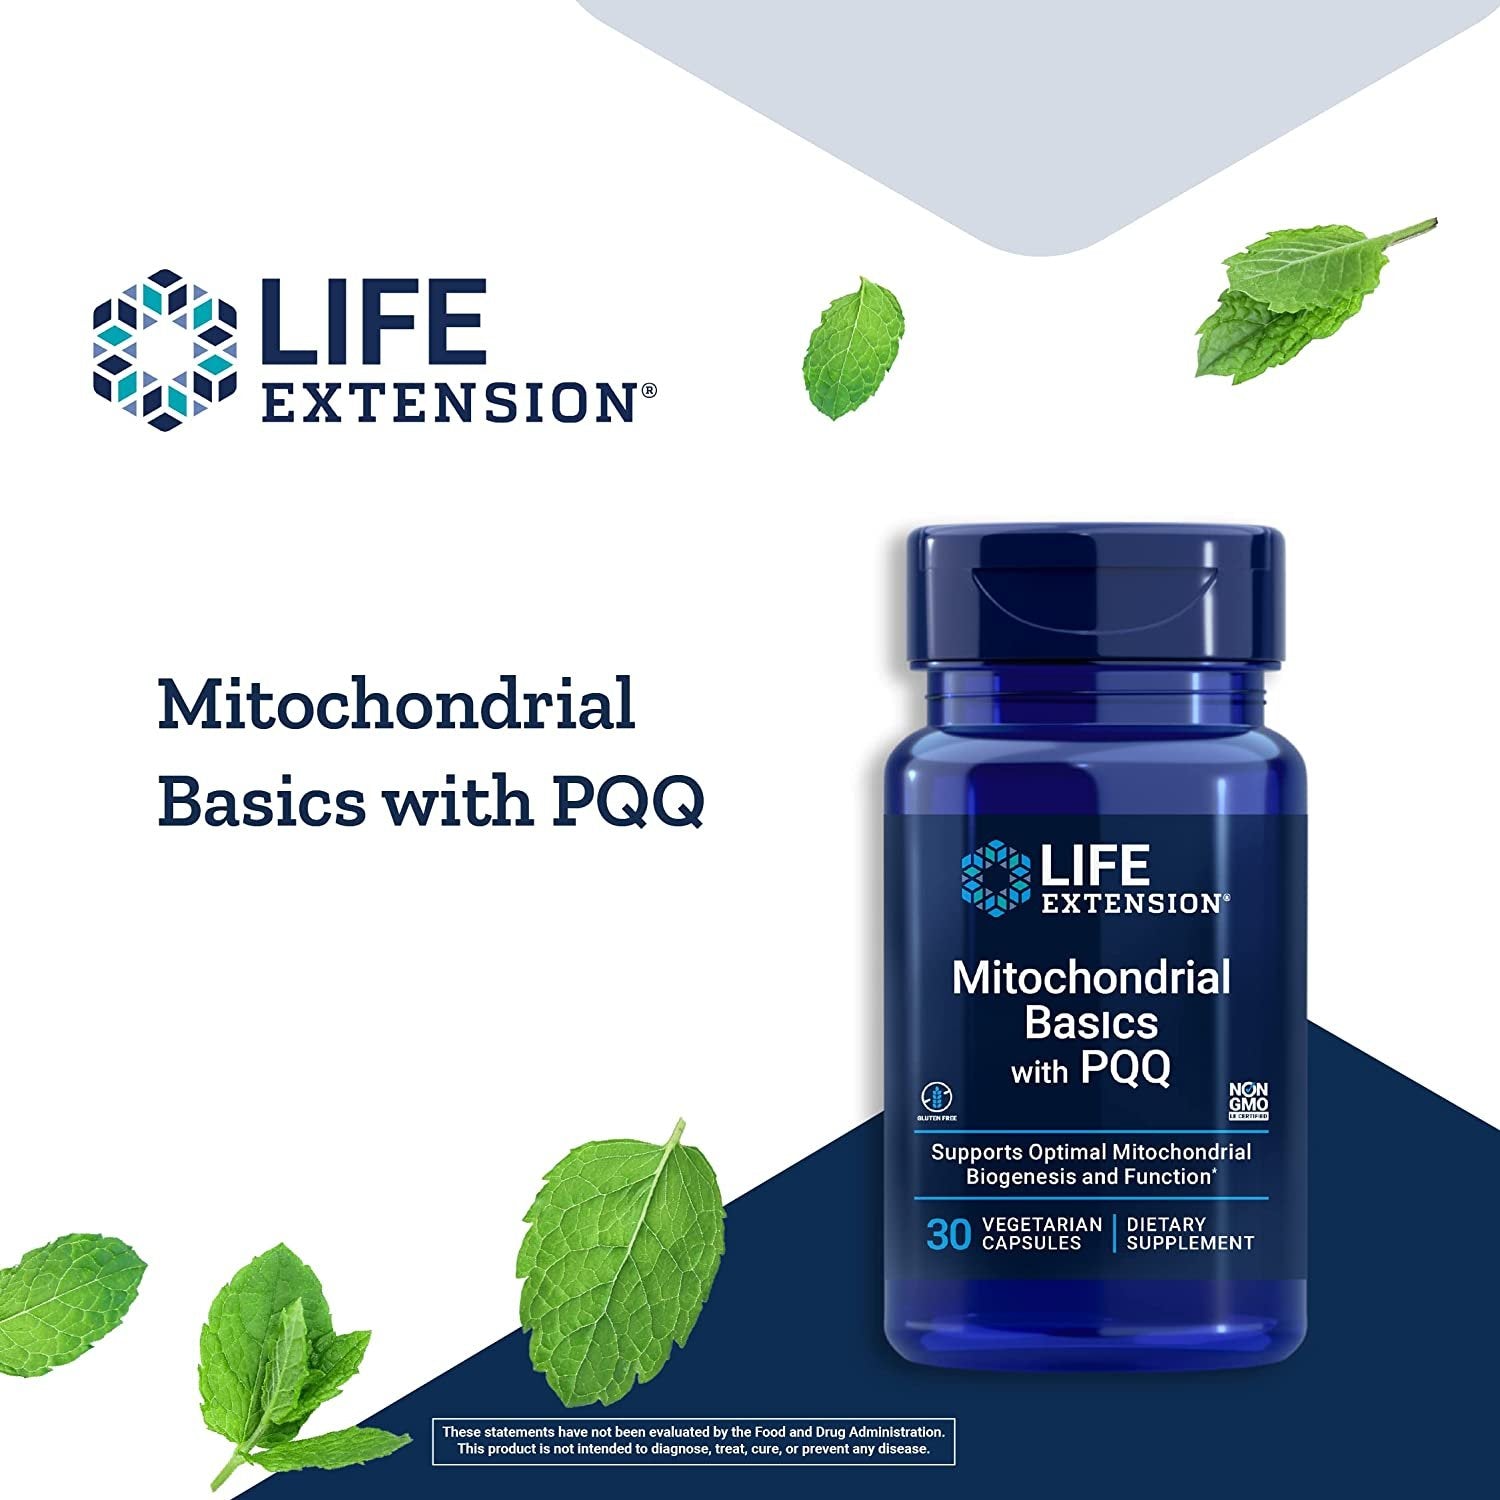 Life Extension Mitochondrial Basics with PQQ -L-Taurine, R-Lipoic Acid, and PPQ Supplement Pills for Cellular Energy Support, Brain and Heart Health – Gluten-Free, Non-GMO – 30 Capsules